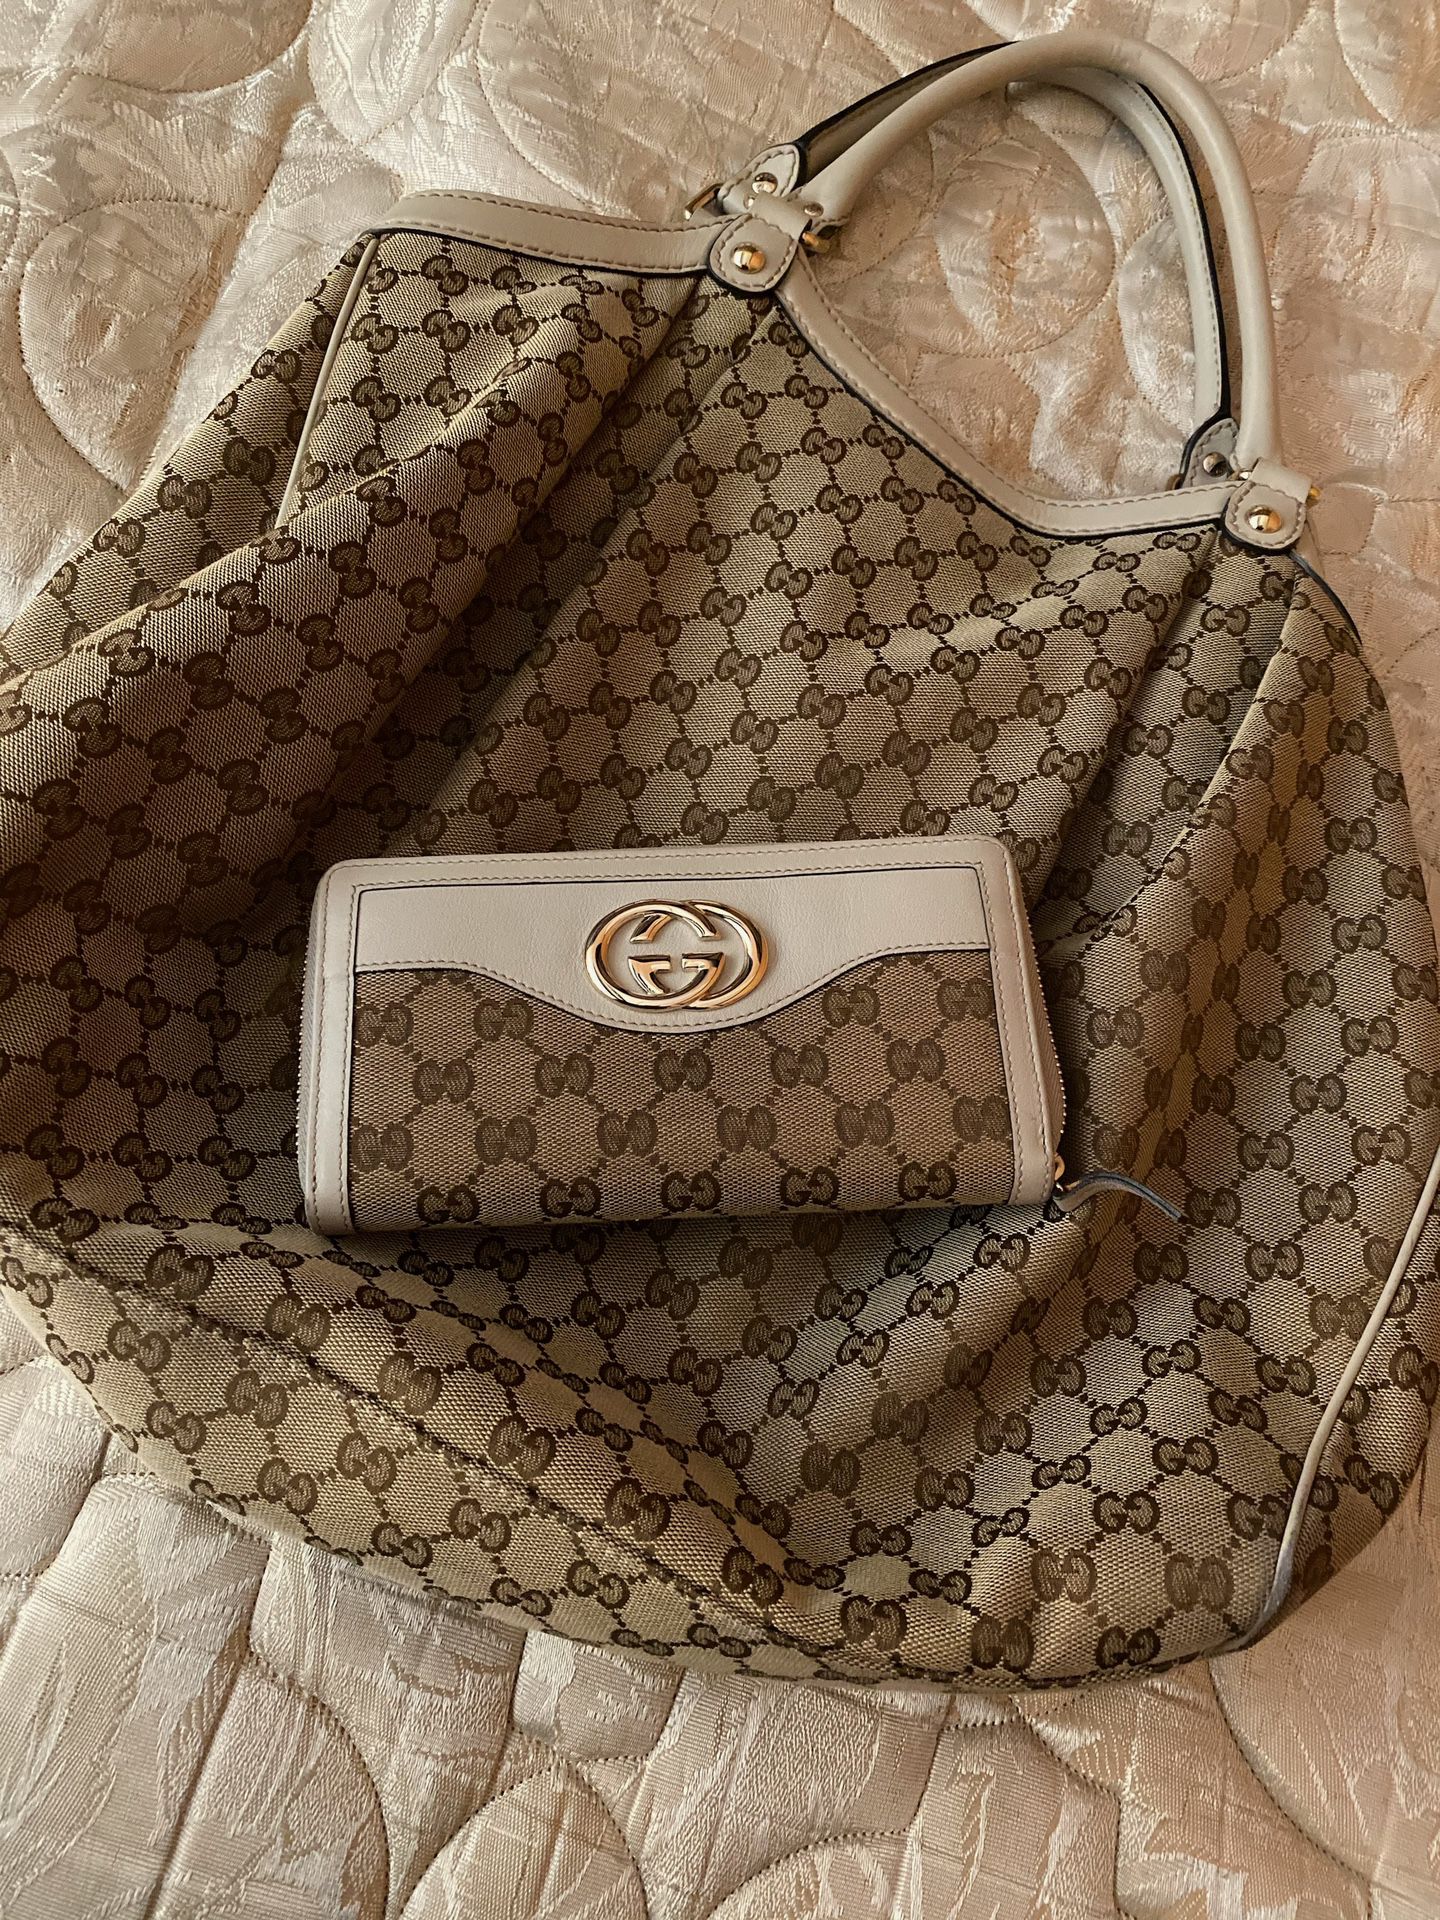 Gucci bag with wallet